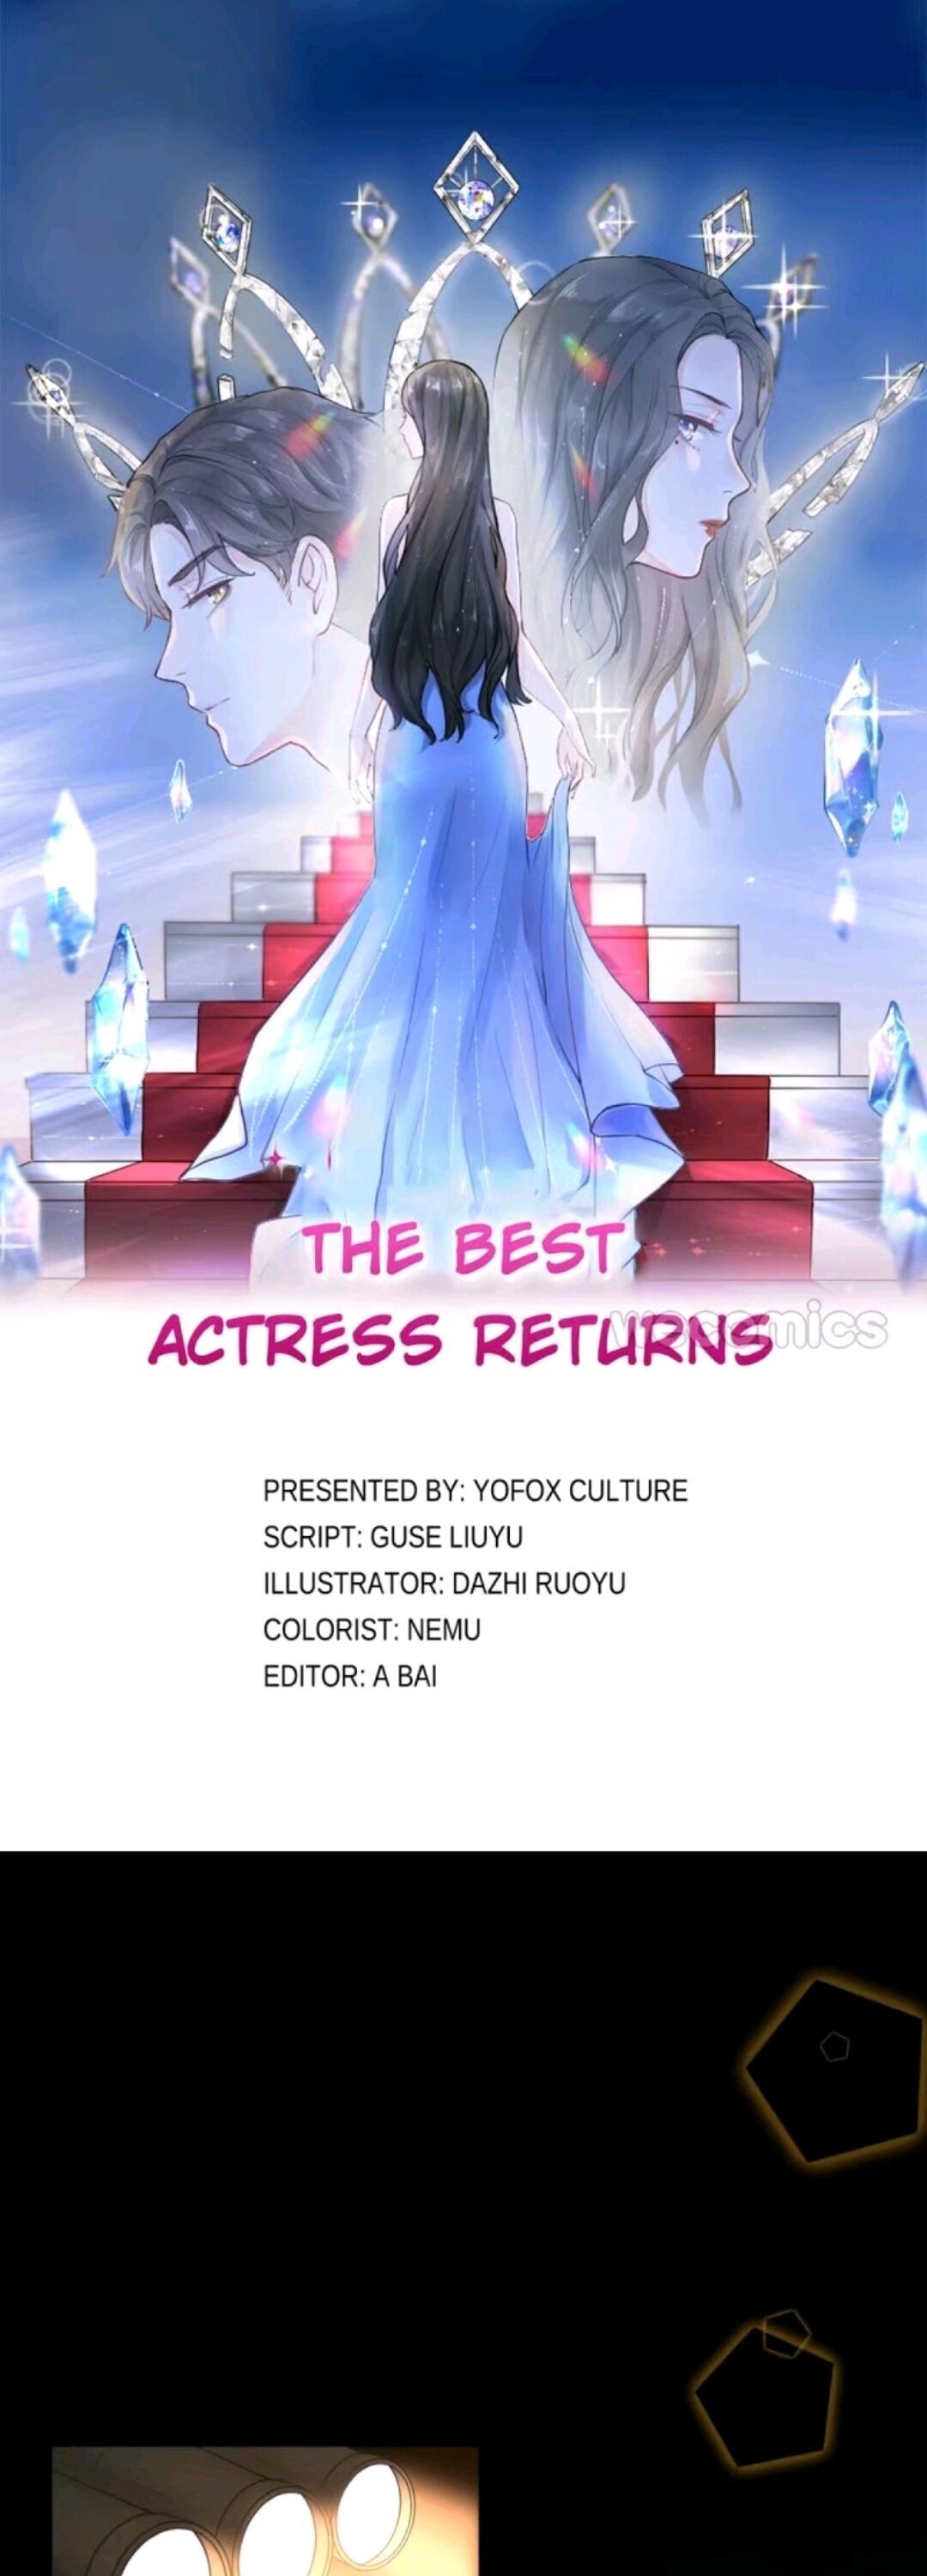 The Best Actress Returns - Page 2